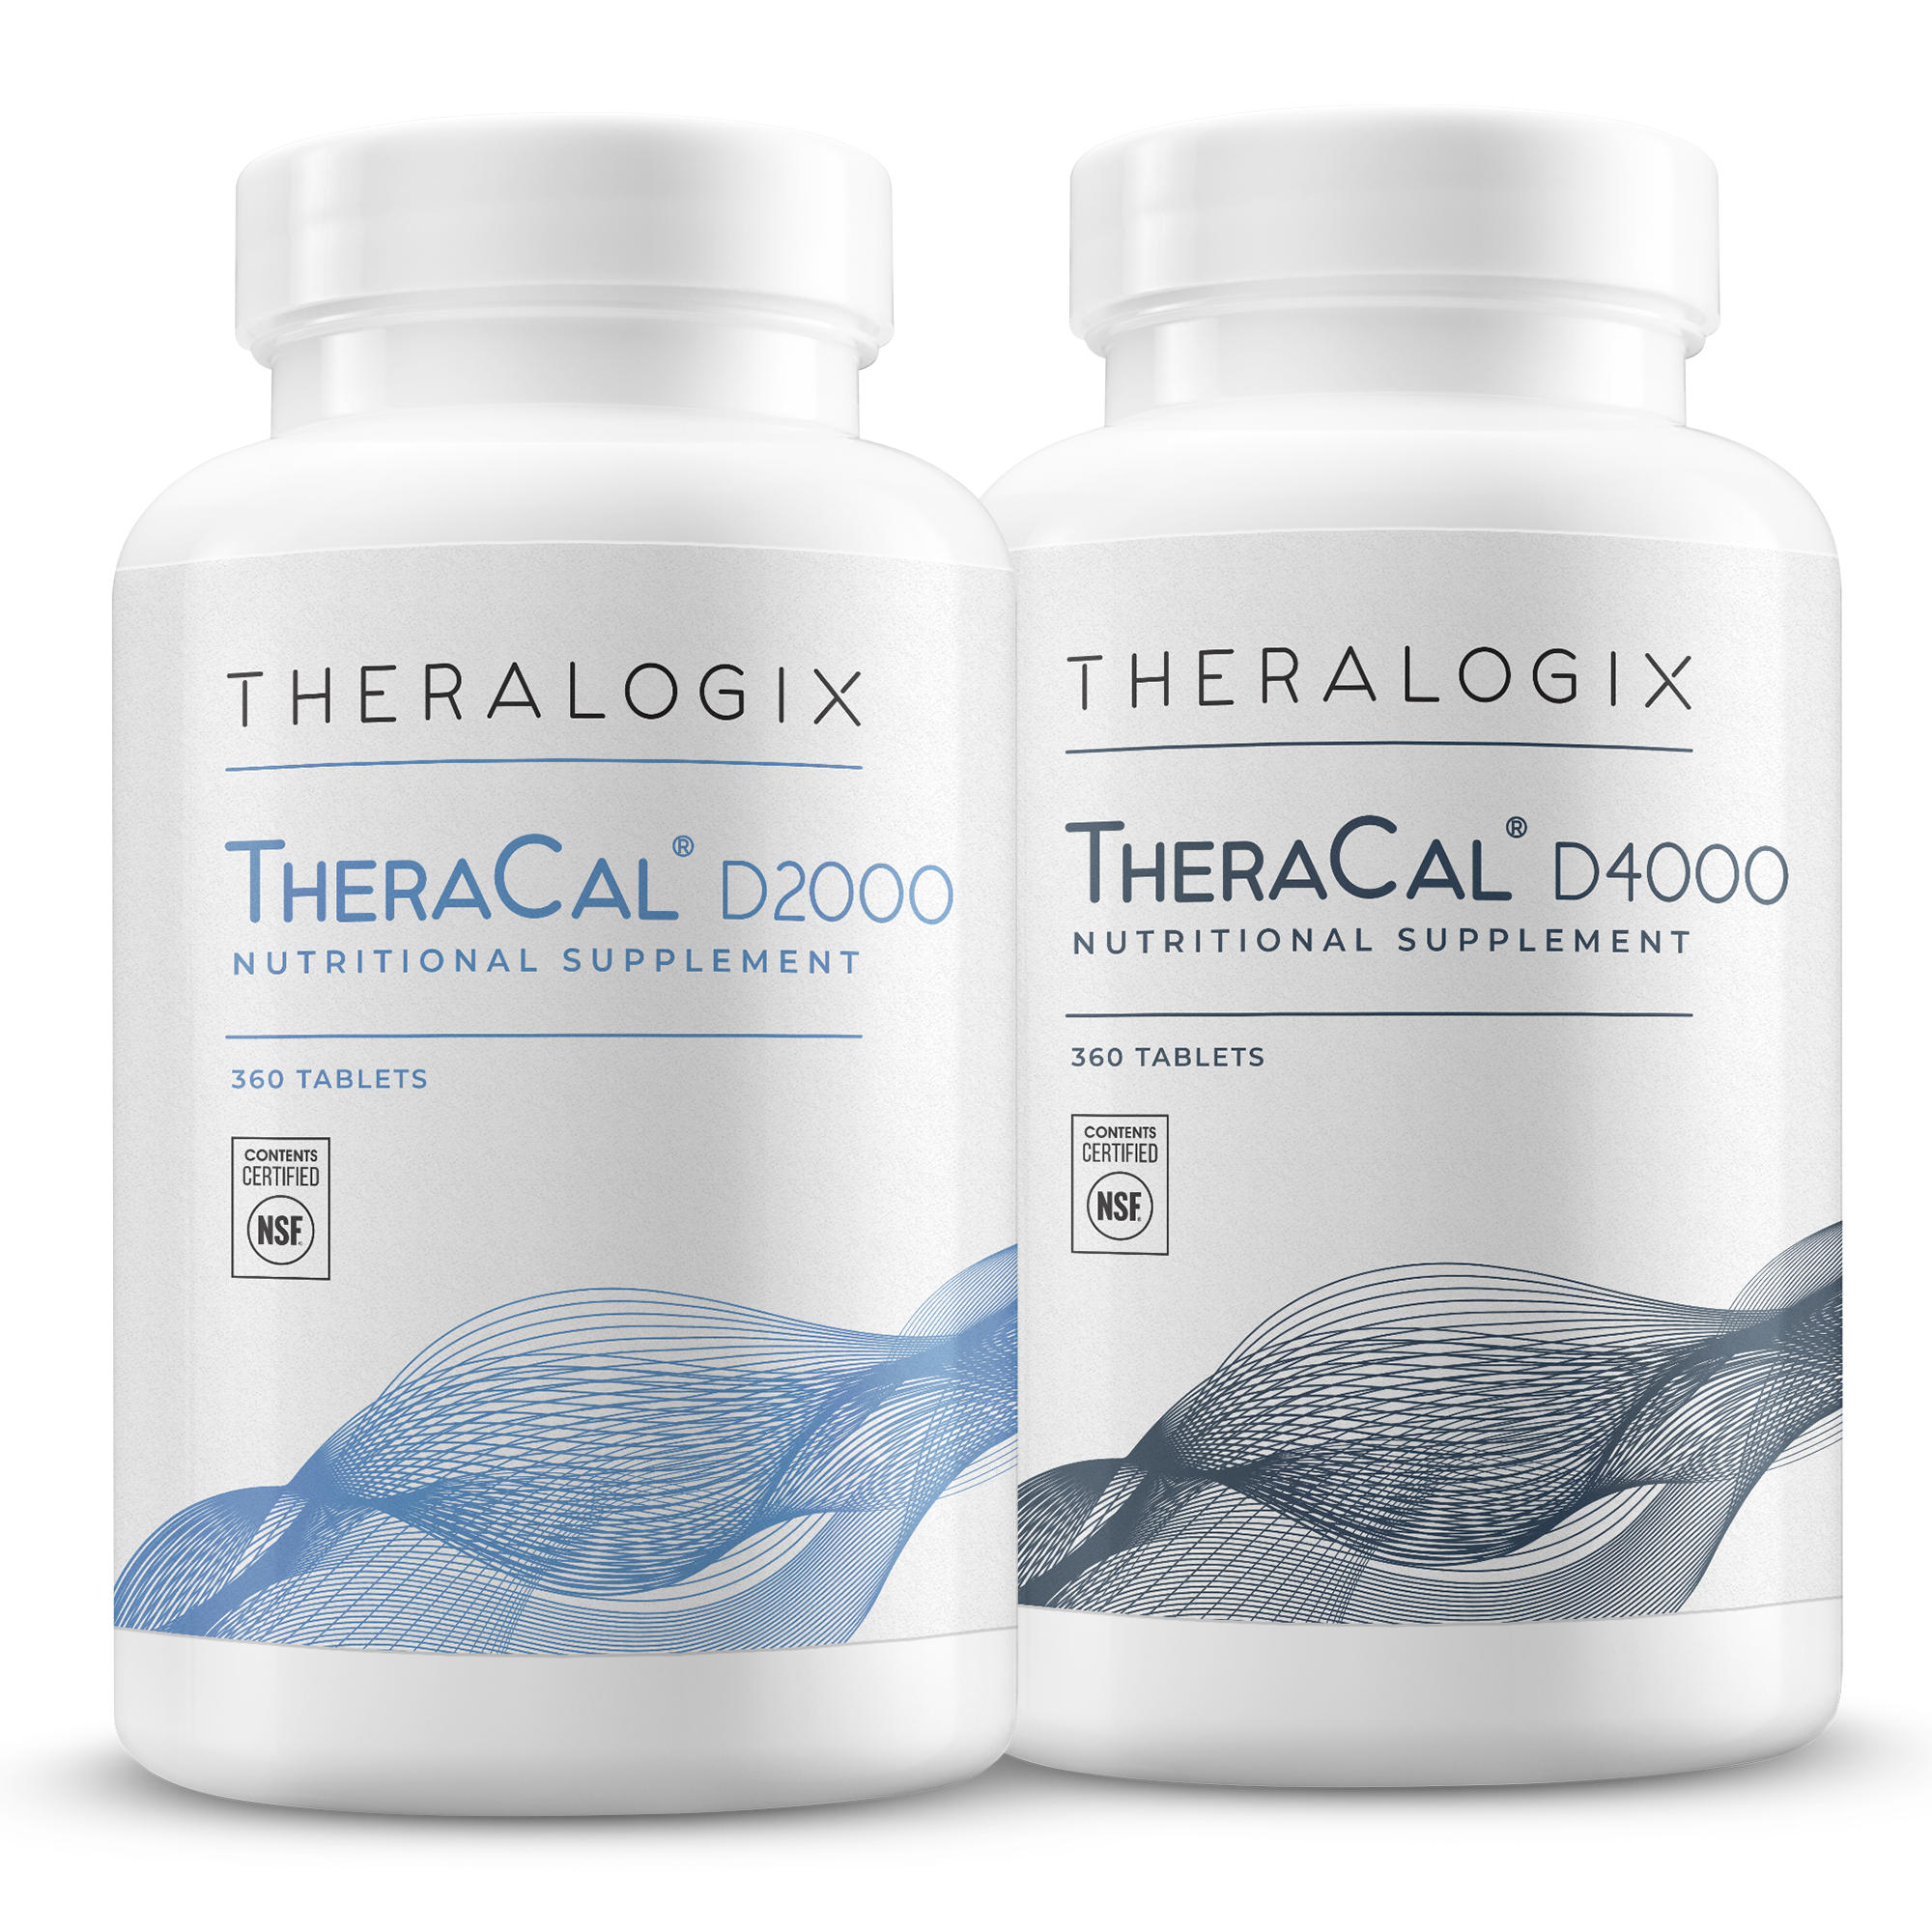 TheraCal is a comprehensive bone health supplement formulated to maintain strong bones and support a healthy, active lifestyle.*  